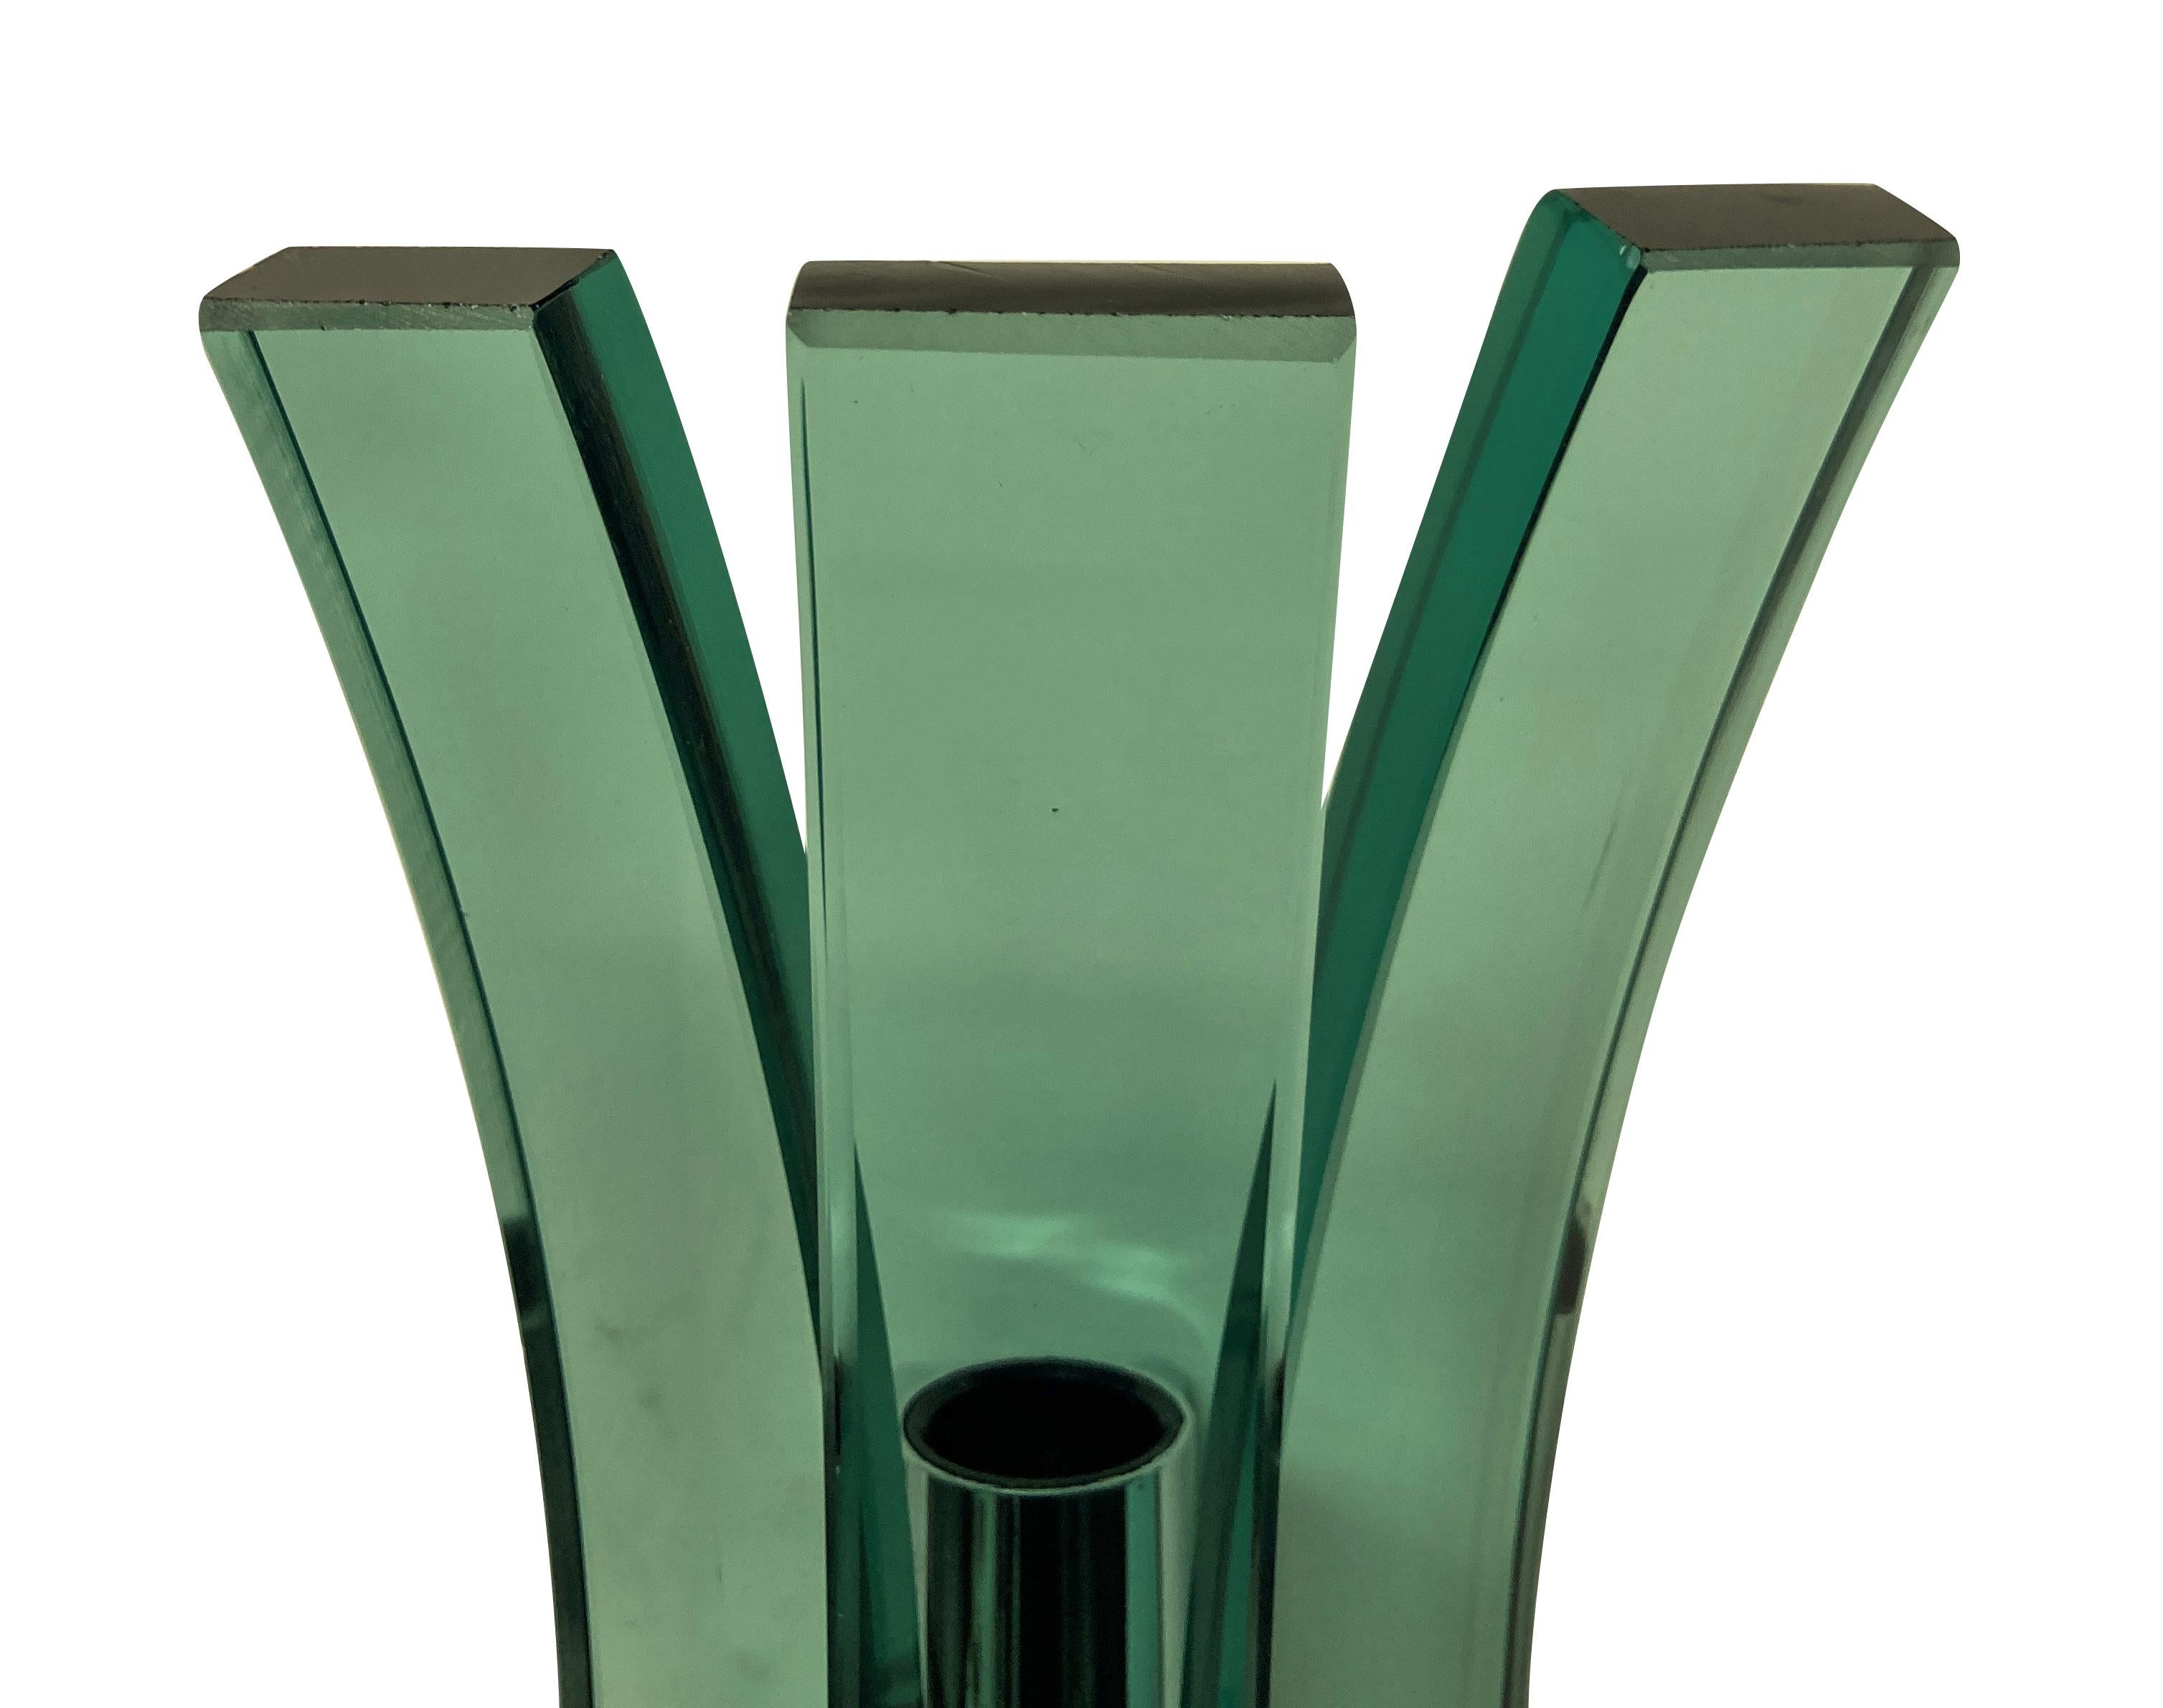 A pair of Italian wall sconces in green glass by Veca, each with three curved glass panels with up-lighter and down-lighter.